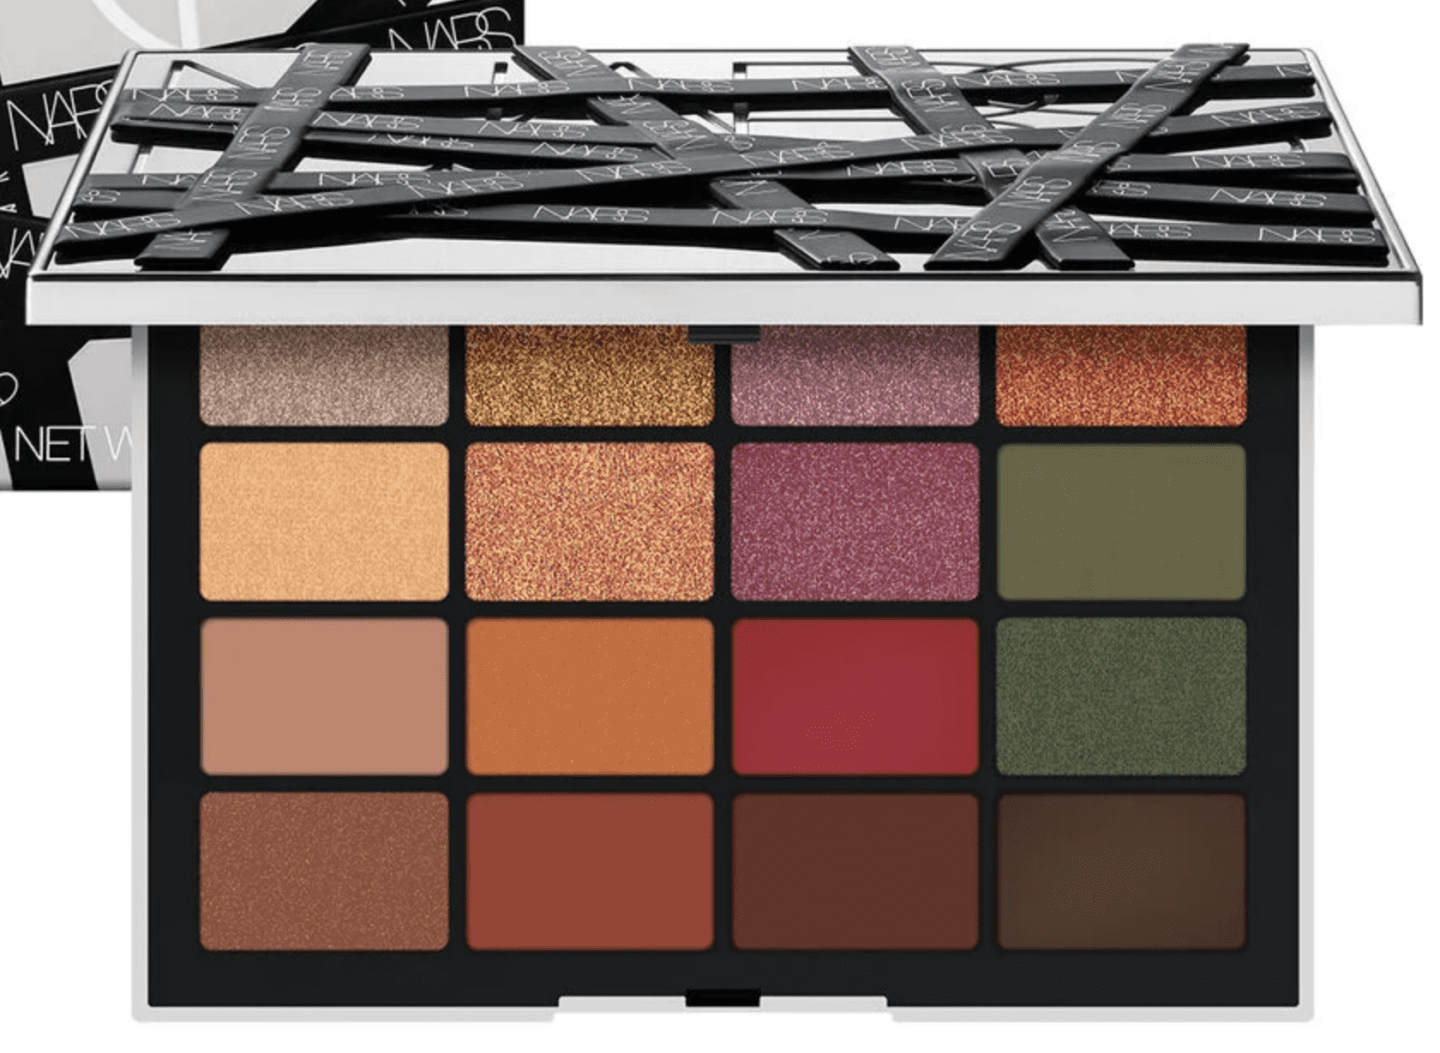 Holiday 2021 Makeup Releases I NARS Bijoux Eyeshadow Palette